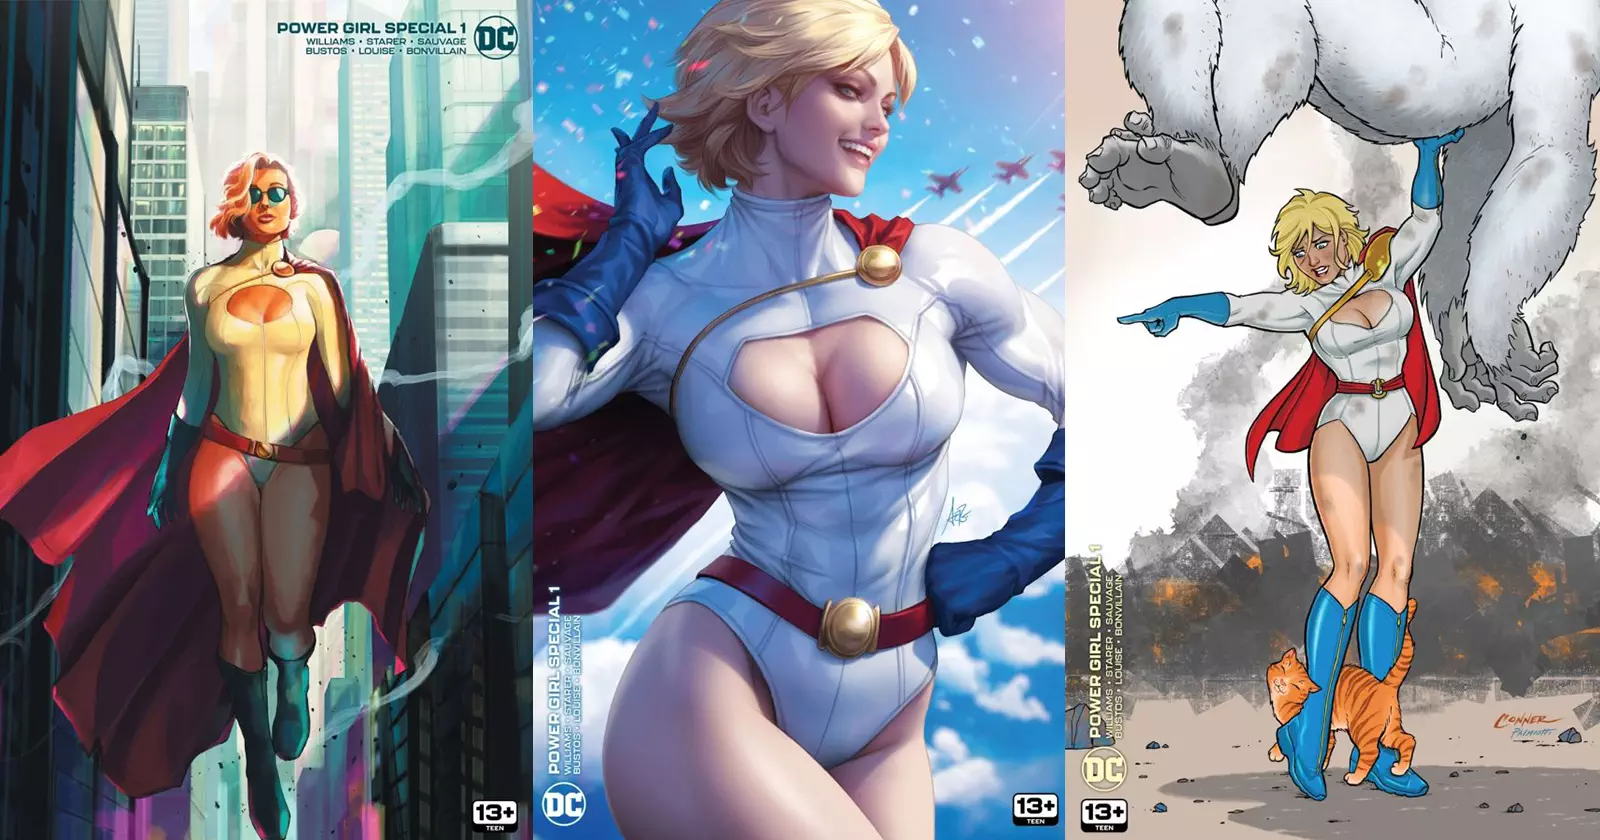 Comic Book Preview Power Girl Special 1 